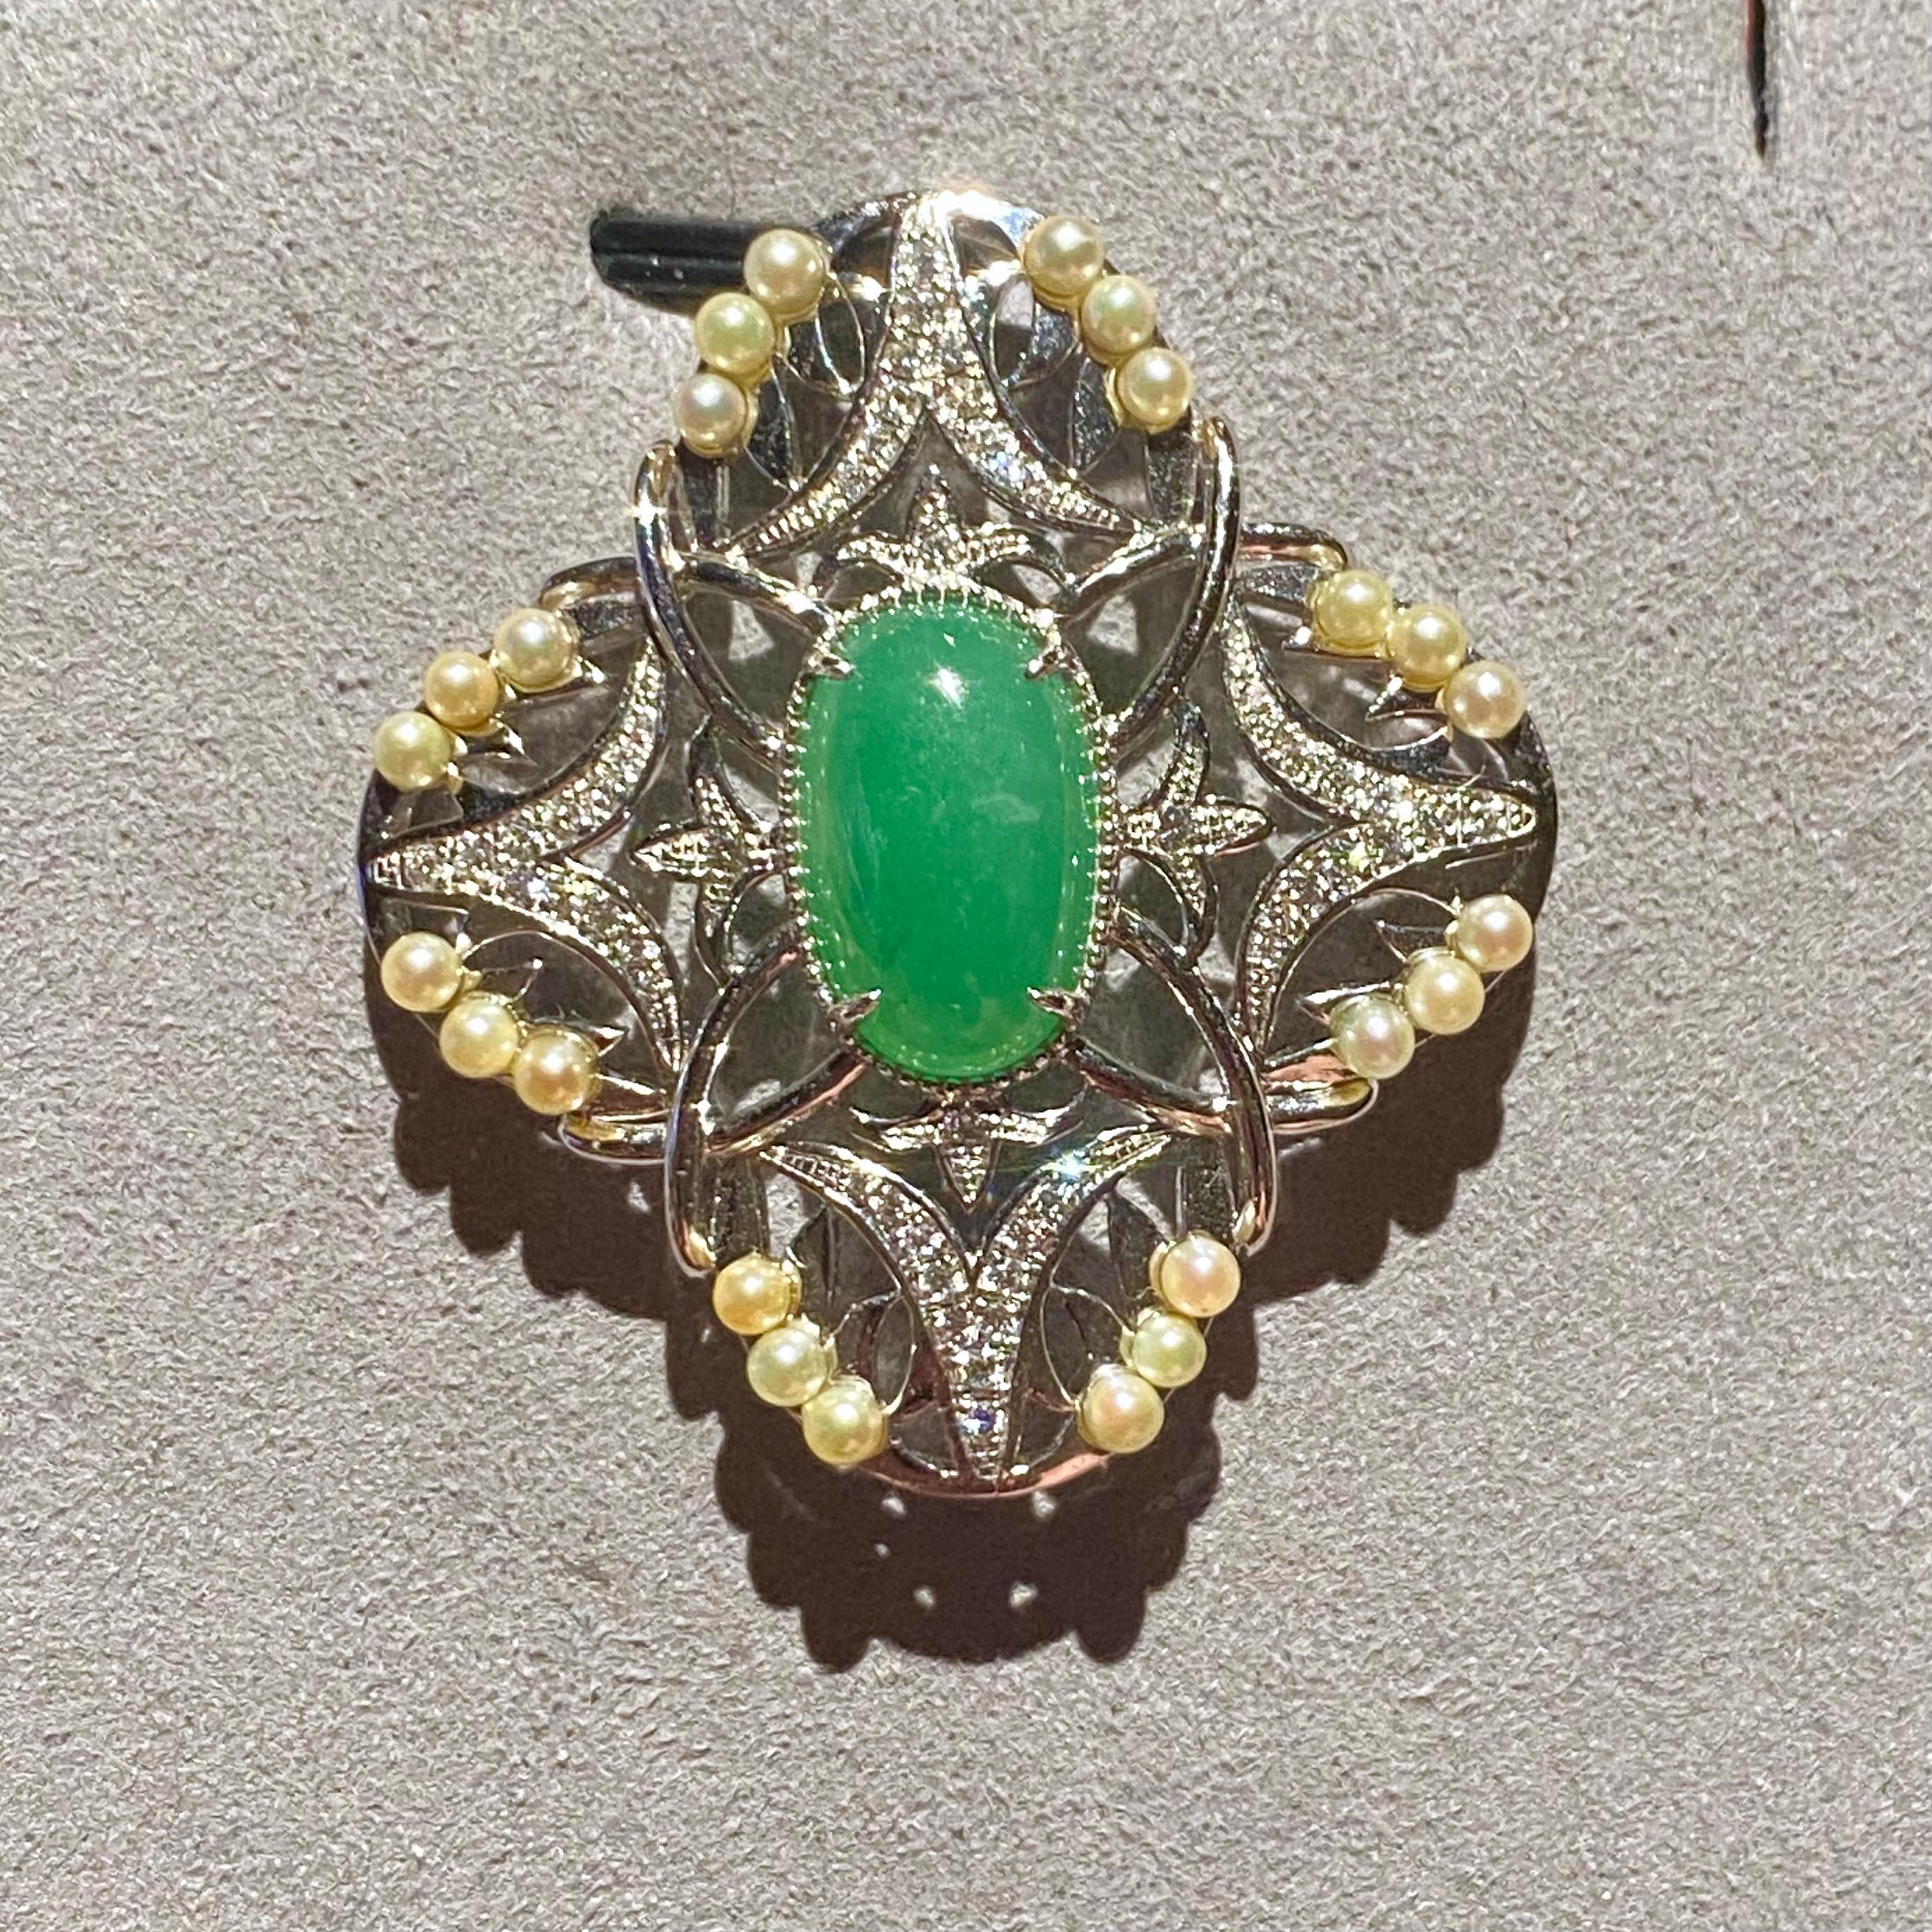 This is a Type A Green Jadeite Pendant. The pendant is of a flower motif with 4 petals. The green jadeite is located at the center of the pendant and is surrounded by 4 similar petal like motif. There are 6 seed pearls in each motif and which 3 are